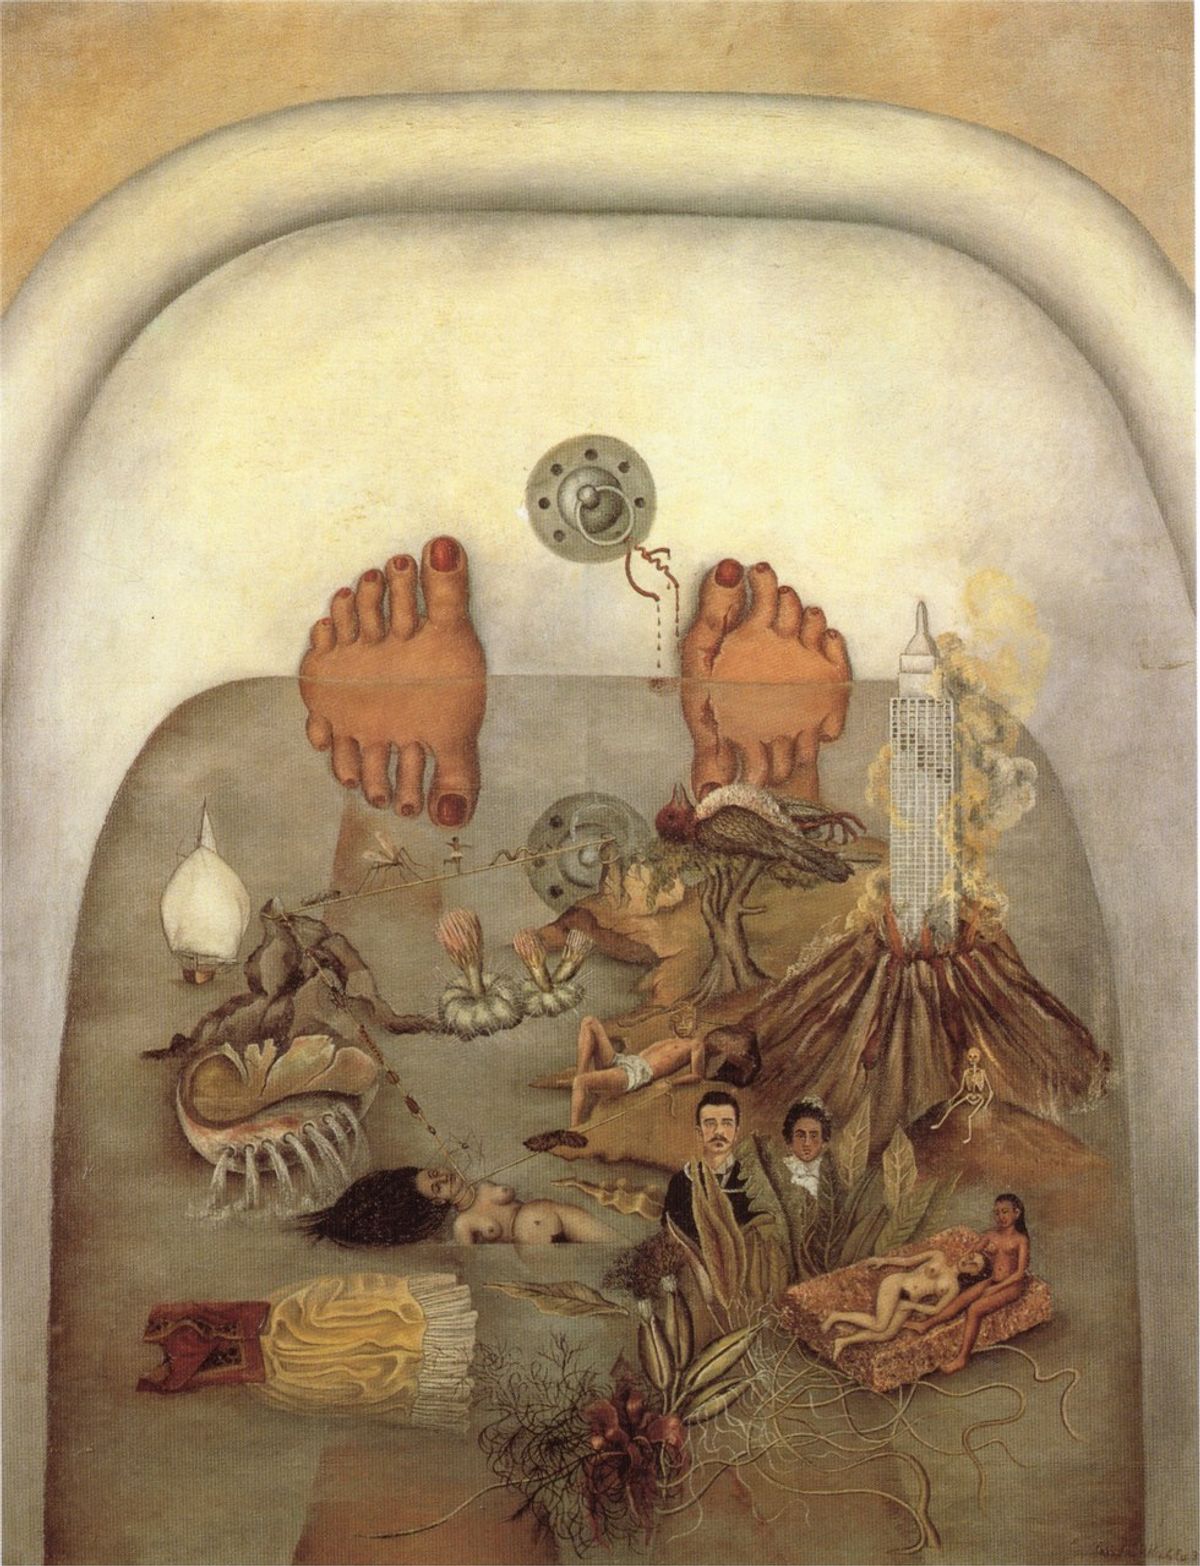 An Interpretation Of Frida Kahlo's "What The Water Gave Me"